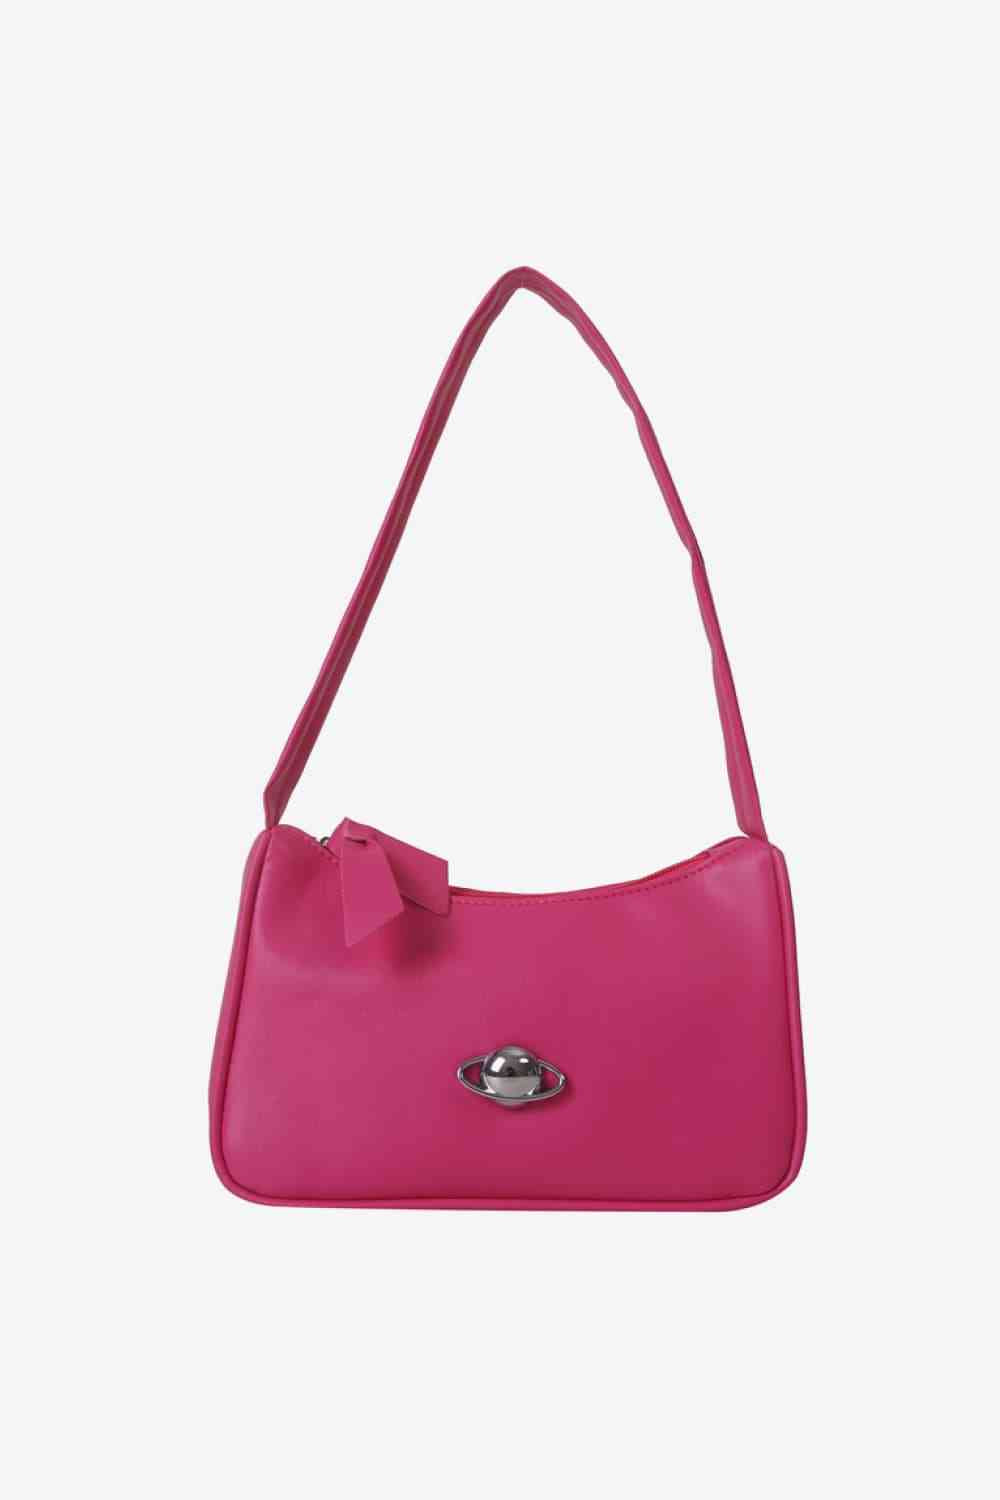 PU Leather Shoulder Bag - Deep Rose / One Size - All Products - Handbags - 1 - 2024